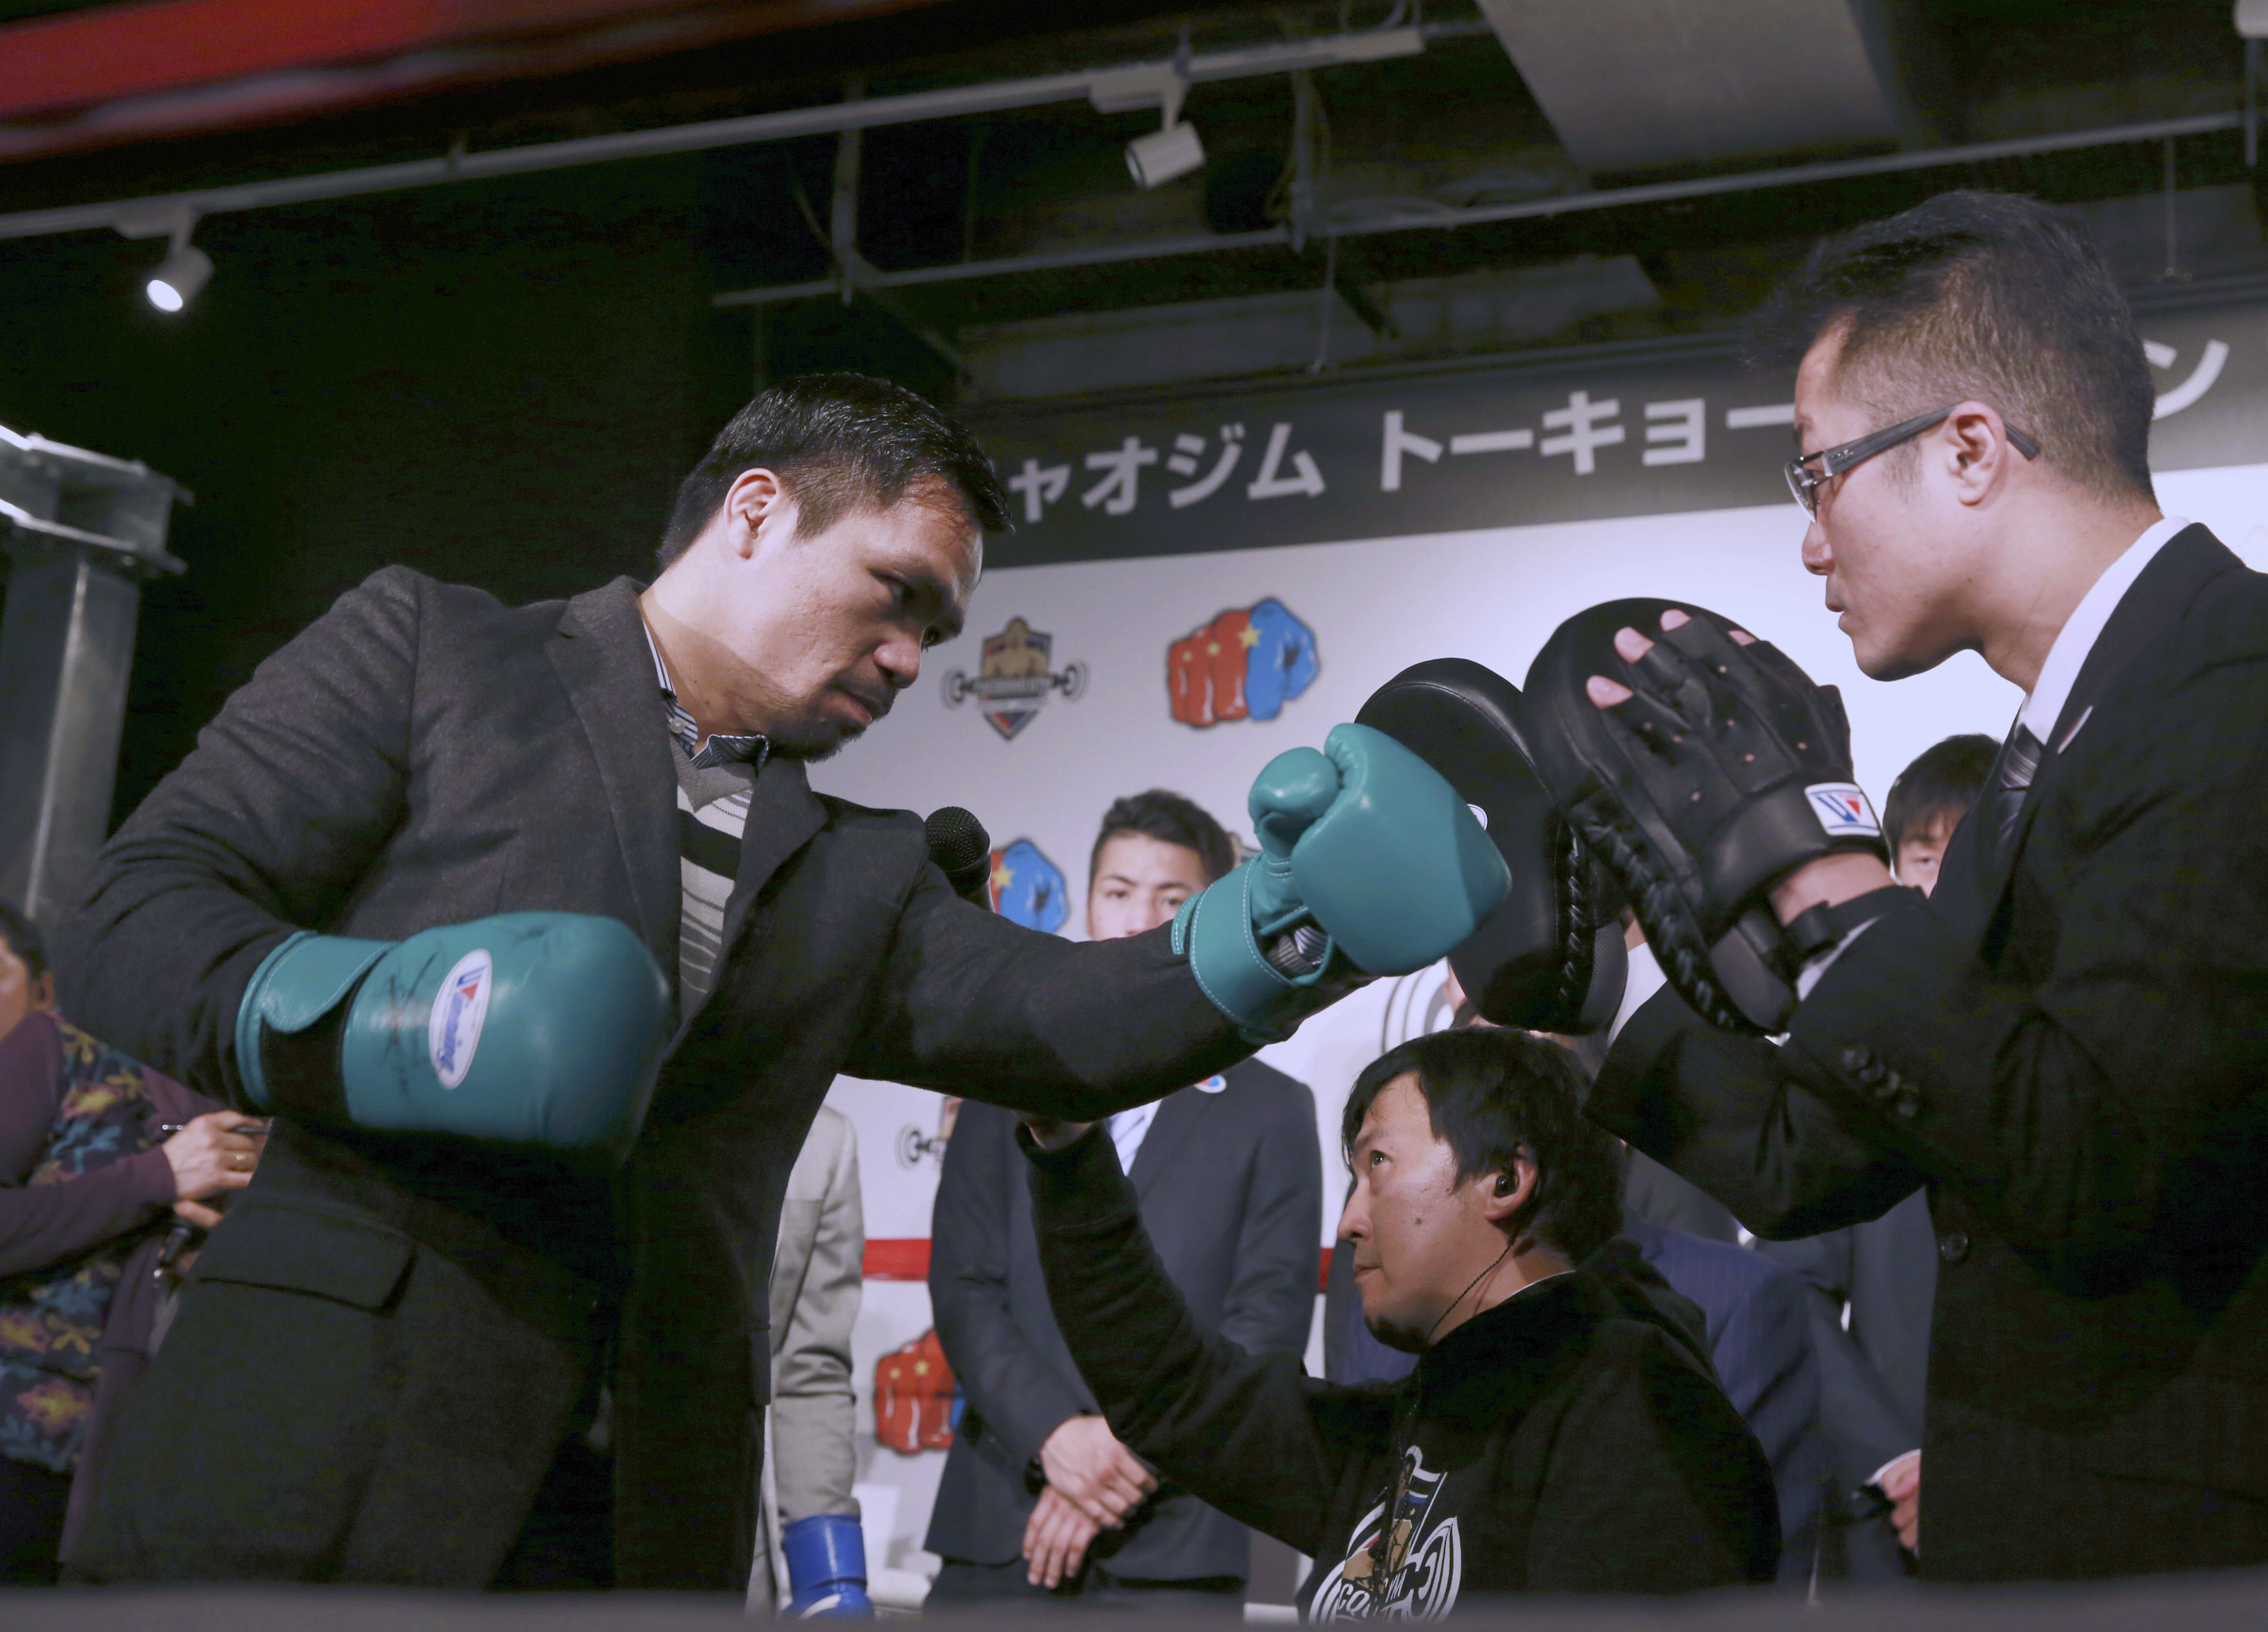 Filipino boxer Manny Pacquiao, left, performs during a press conference as he launches a small boxing gym named after him in Tokyo, Friday, Nov. 25, 2016. Pacquiao says his next fight will be in April or May next year as that fits his schedule best as Philippine senator. And he would like a rematch with Floyd Mayweather Jr.  Pacquiao defeated Jessie Vargas for a welterweight title earlier in November. (AP Photo/Eugene Hoshiko)